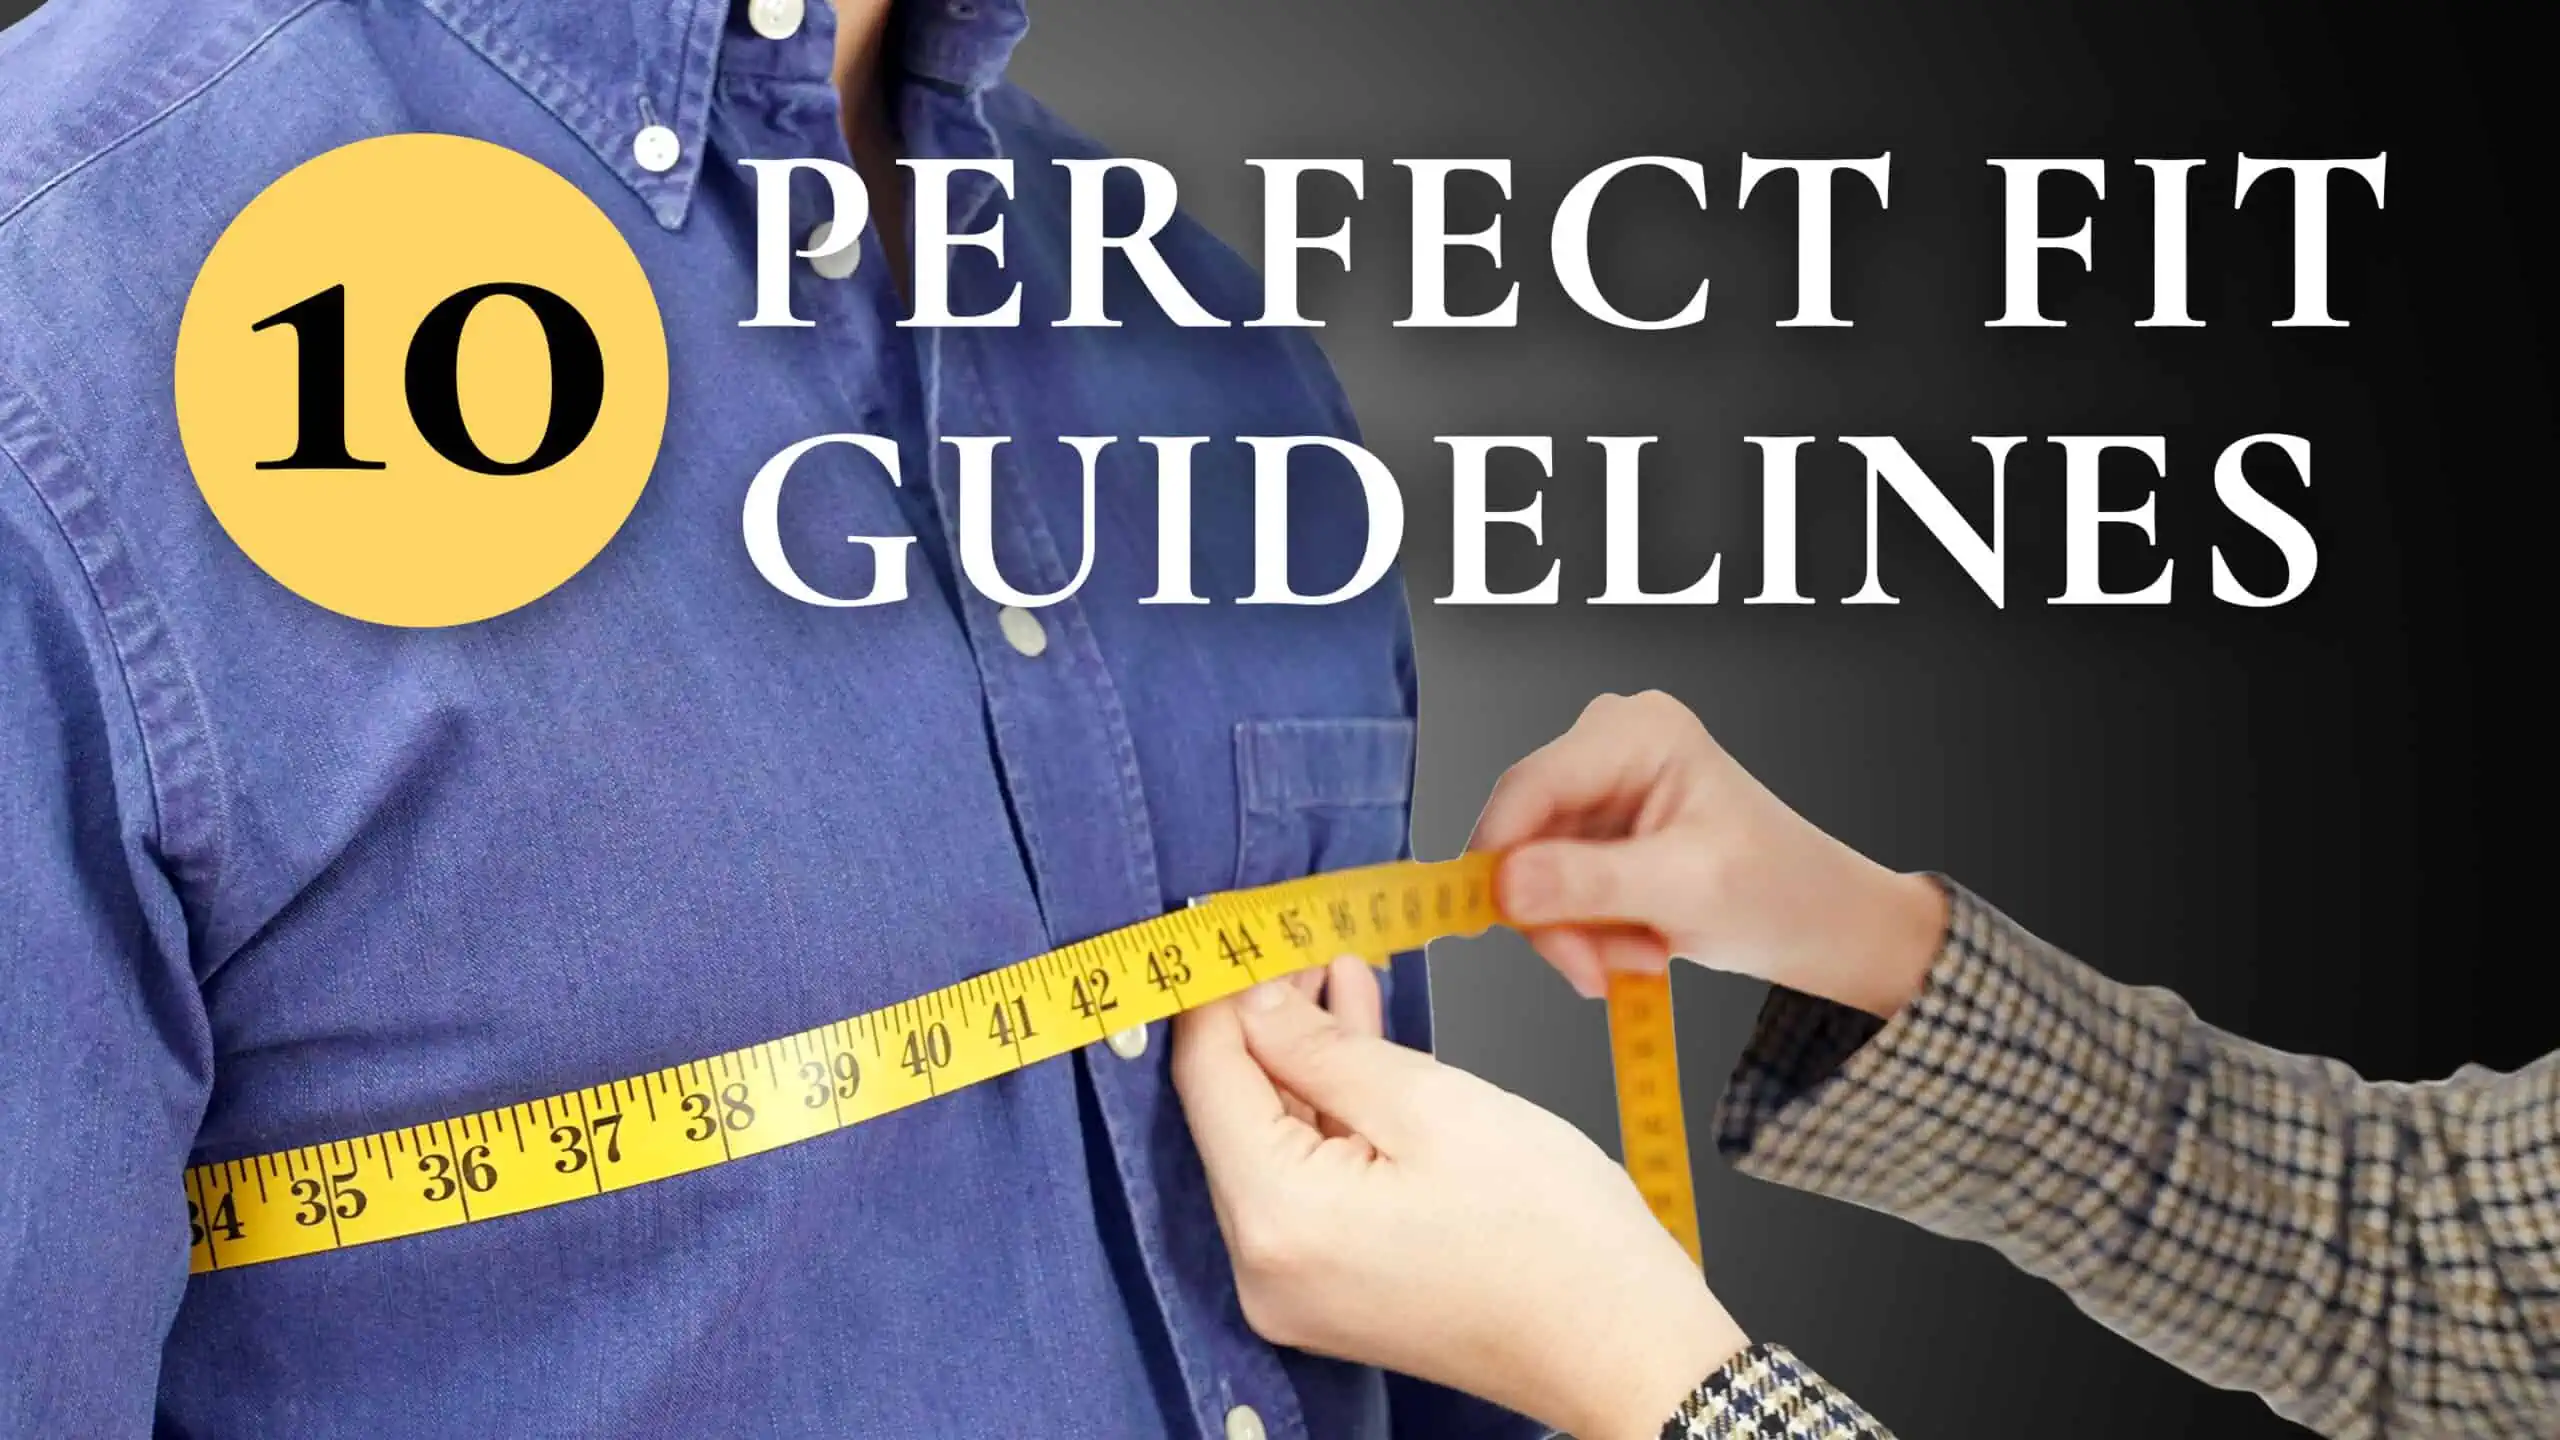 10 perfect fit guidelines 3840x2160 scaled